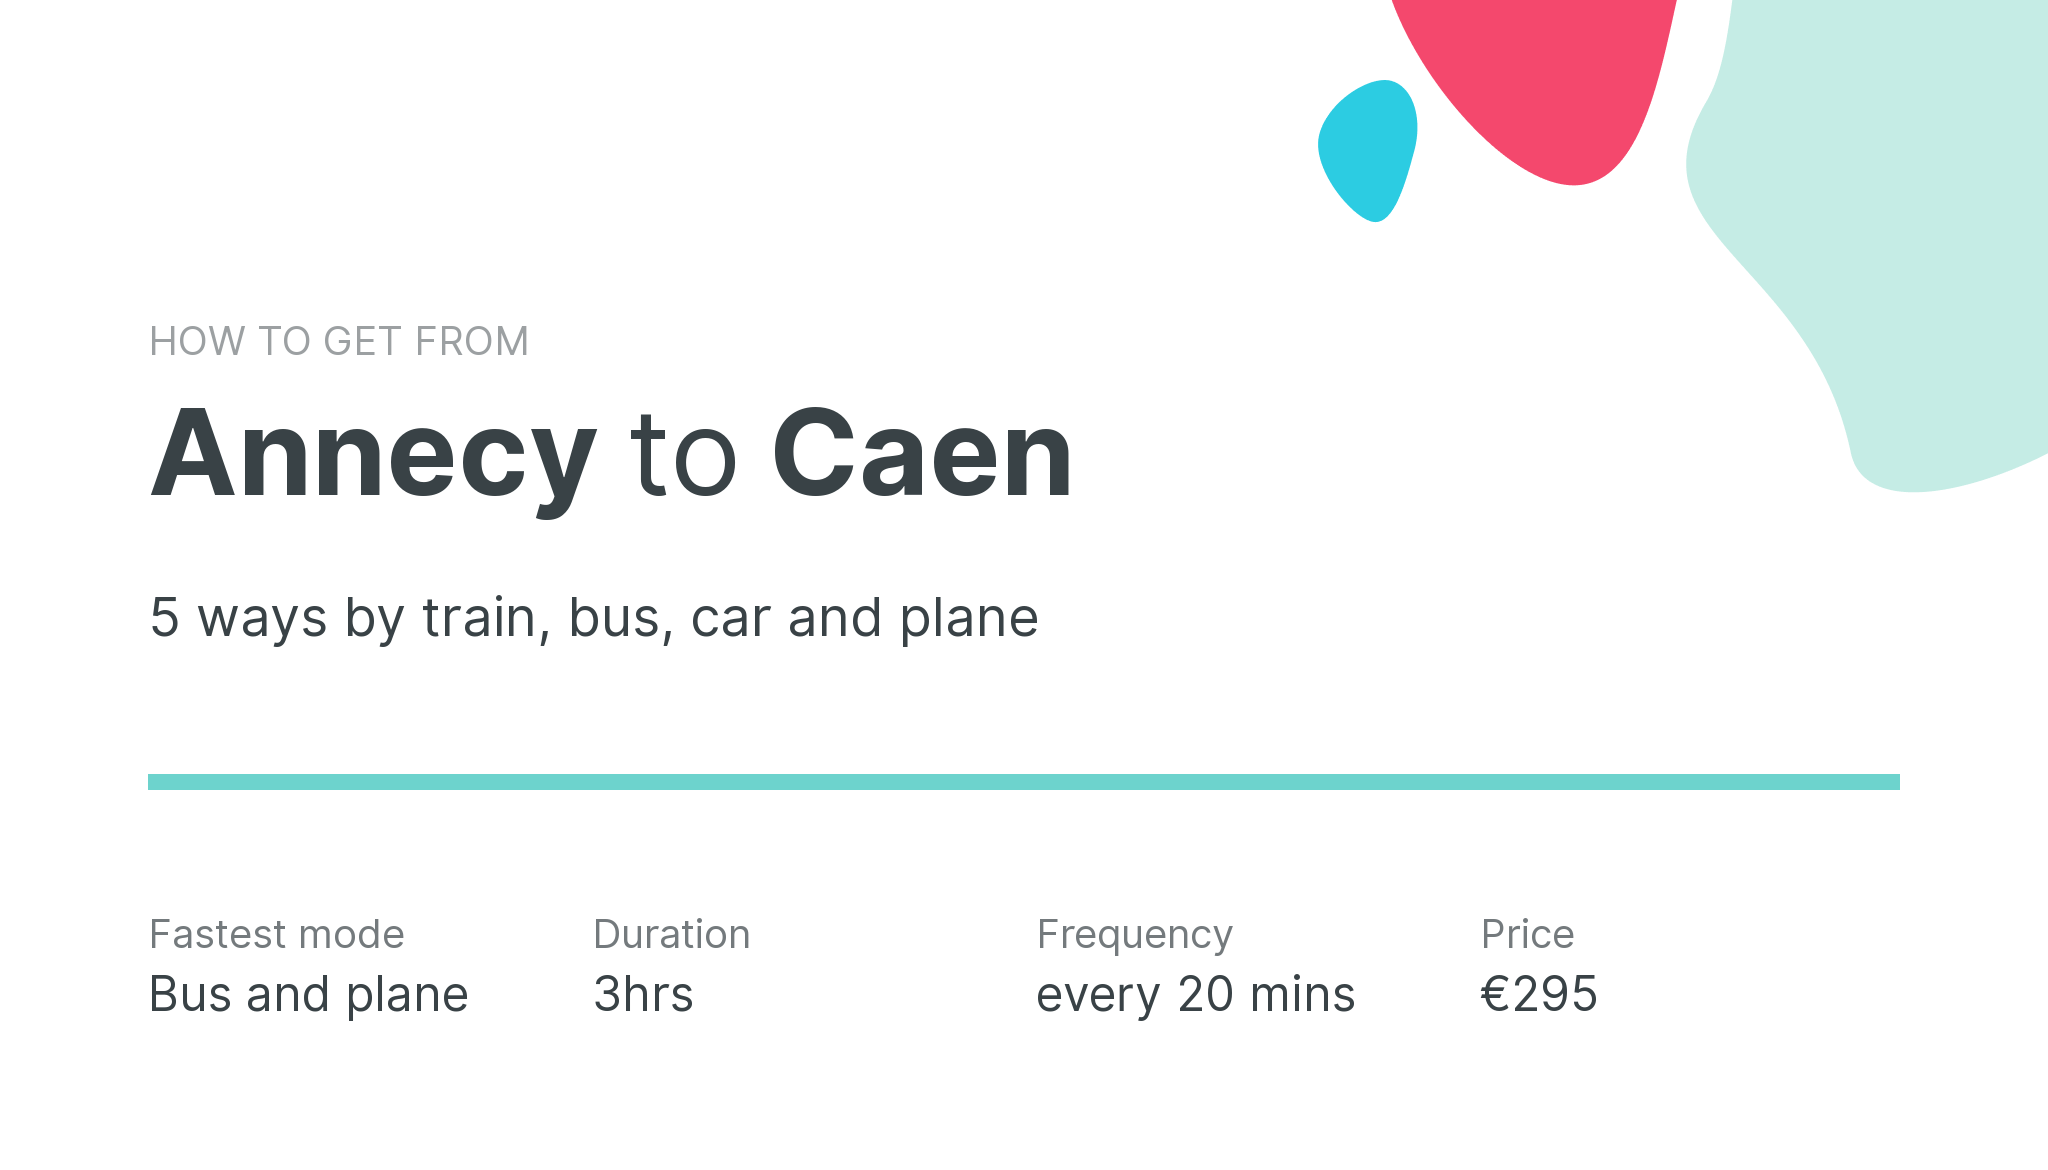 How do I get from Annecy to Caen